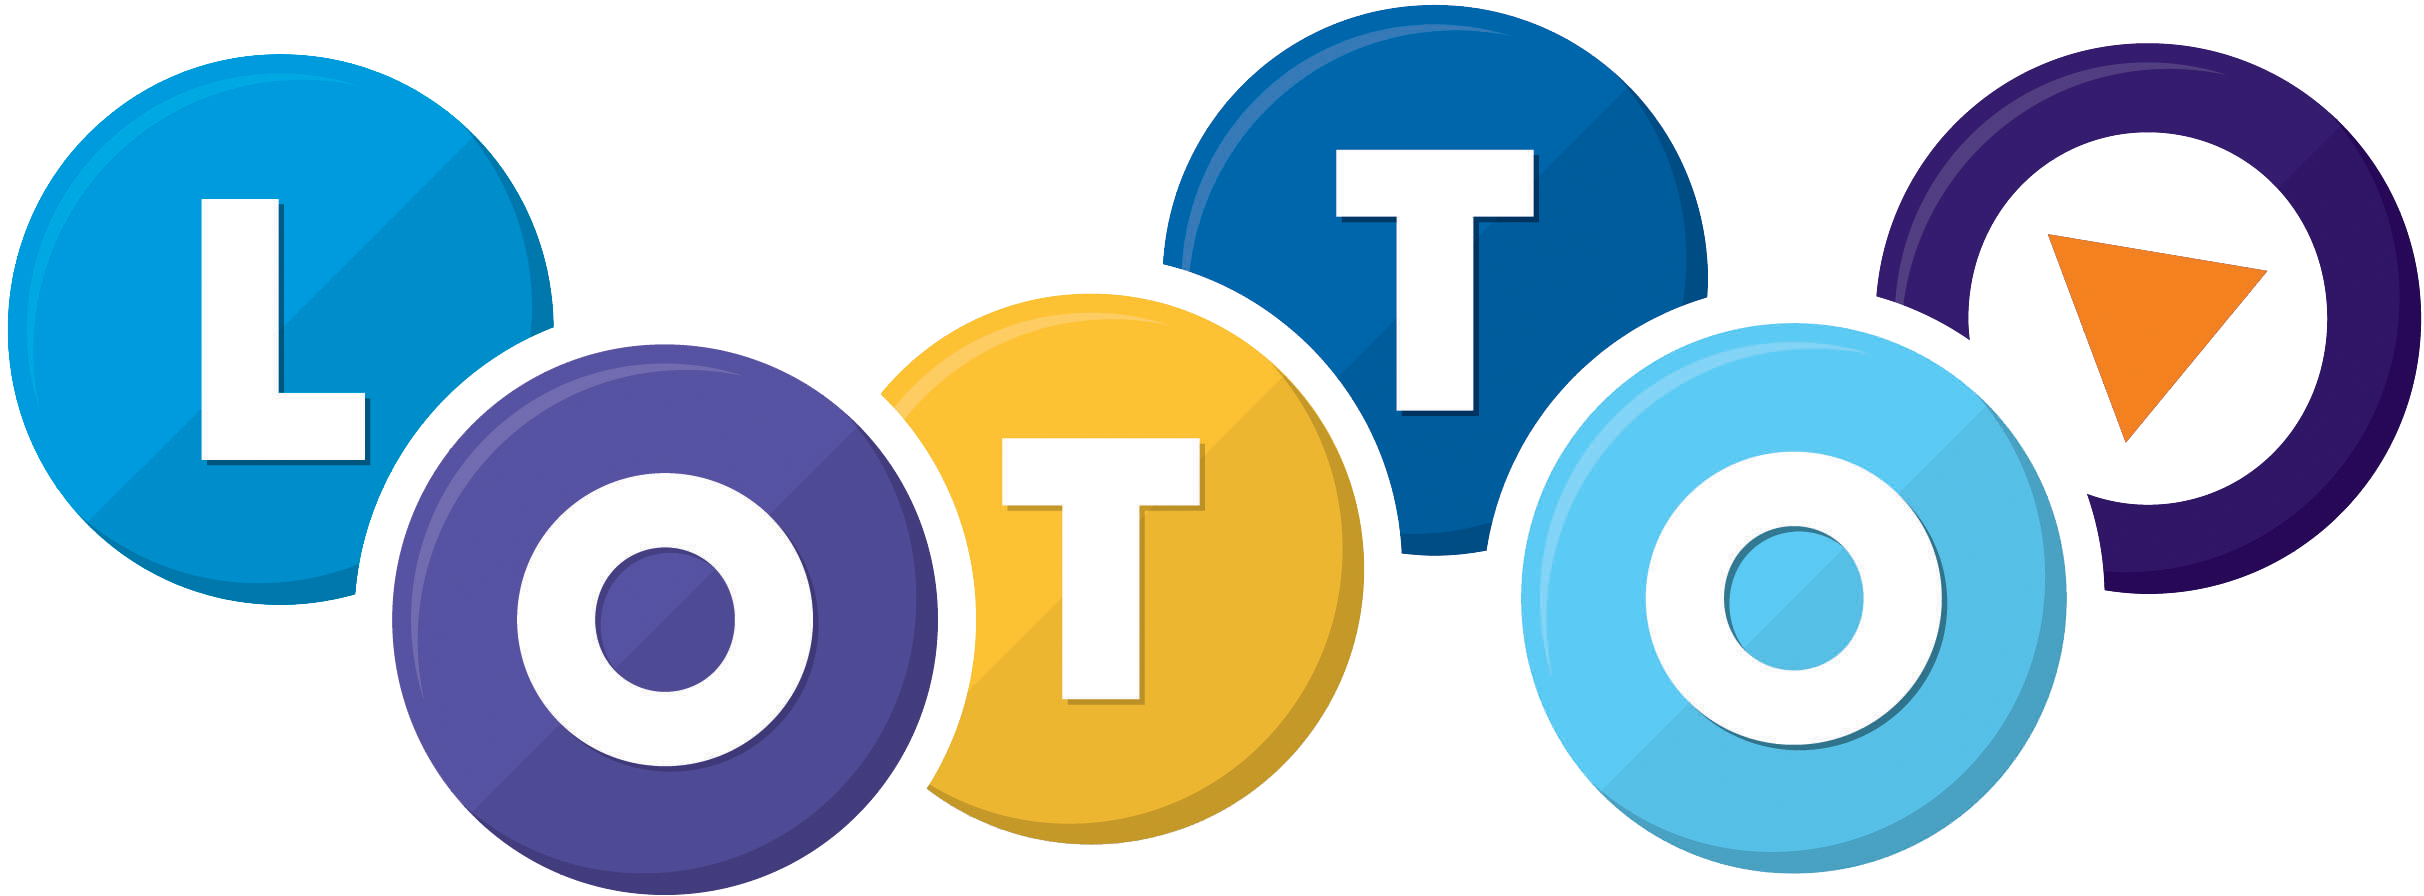 lotto-logo.png